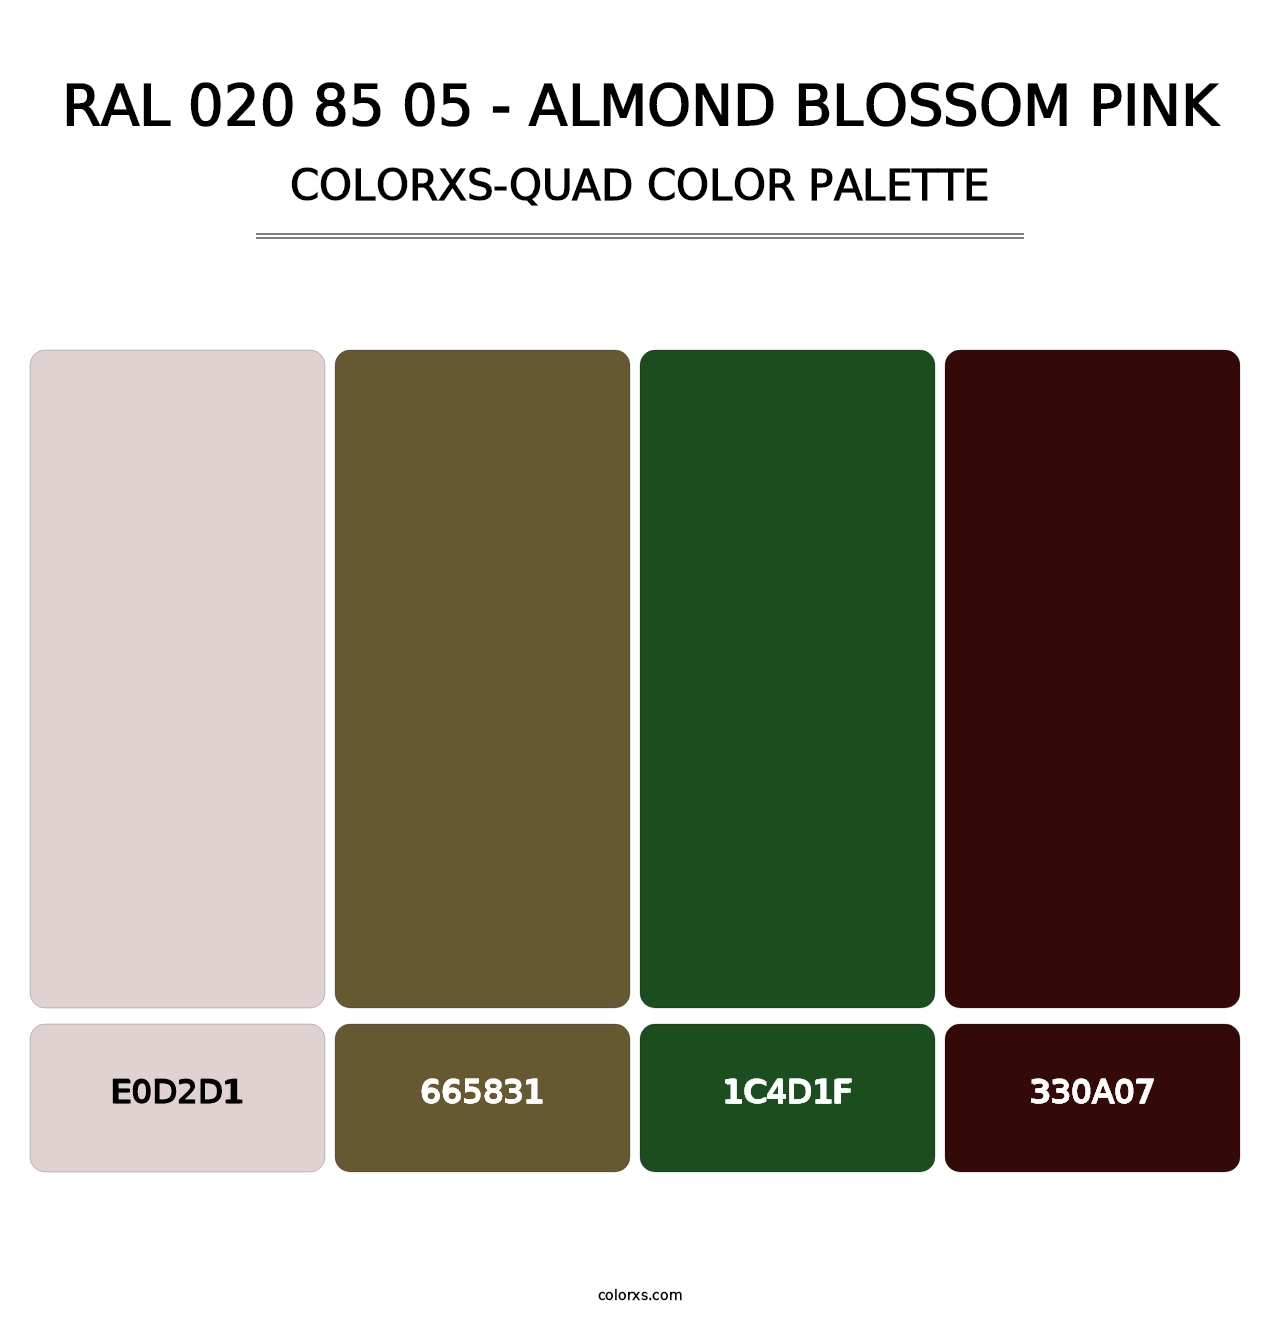 RAL 020 85 05 - Almond Blossom Pink - Colorxs Quad Palette